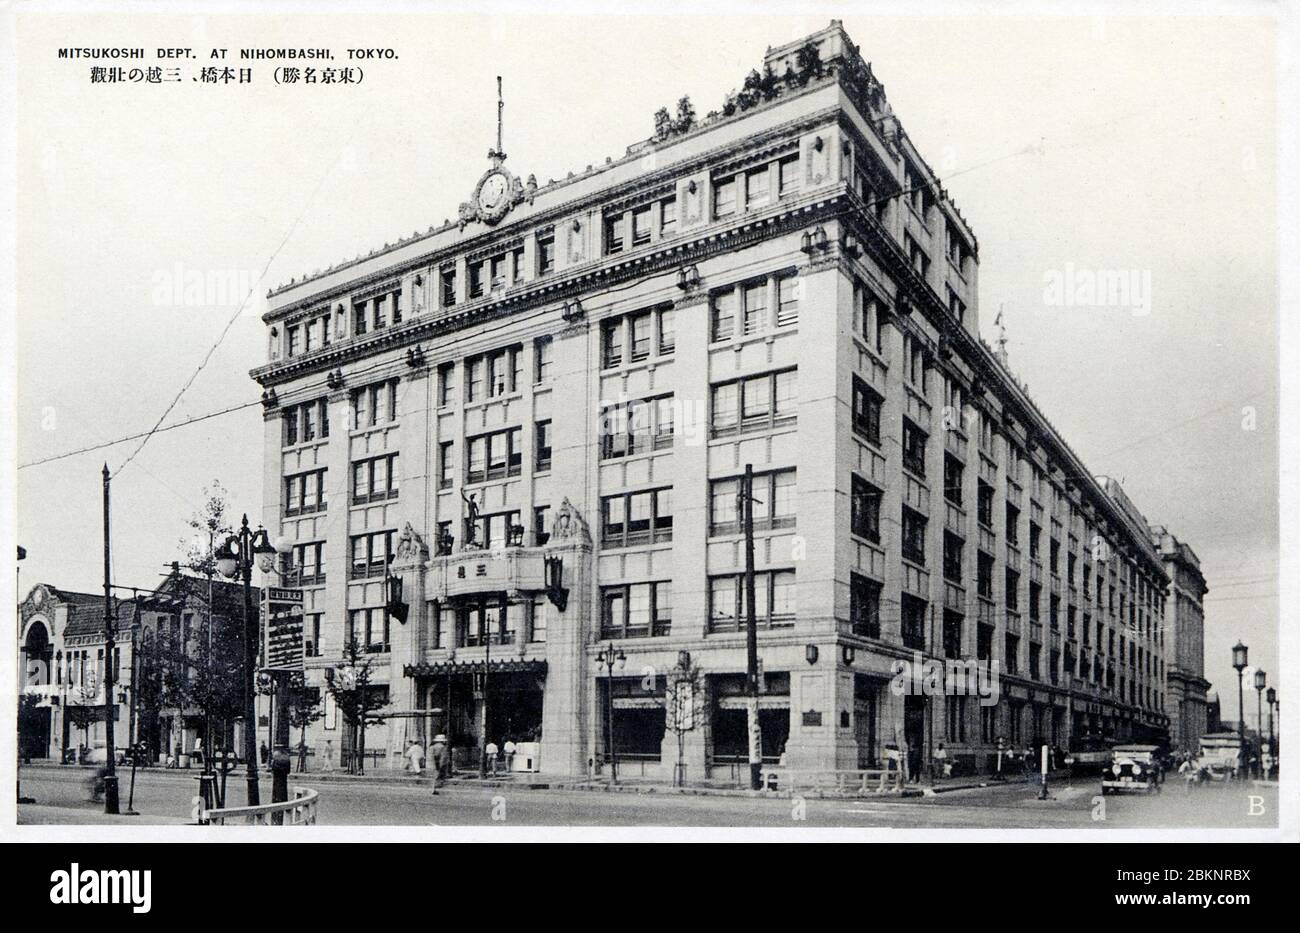 [ 1920s Japan - Japanese Department Store, Tokyo ] —   The main Mitsukoshi Department Store in Nihonbashi, Tokyo.   The building on this image is the third Nihonbashi Mitsukoshi department store. It was built after the Great Kanto earthquake of 1923 and replaced a building dating from 1914 which had been destroyed by fire.  Japan’s first fashion show was held here in 1927.  20th century vintage postcard. Stock Photo